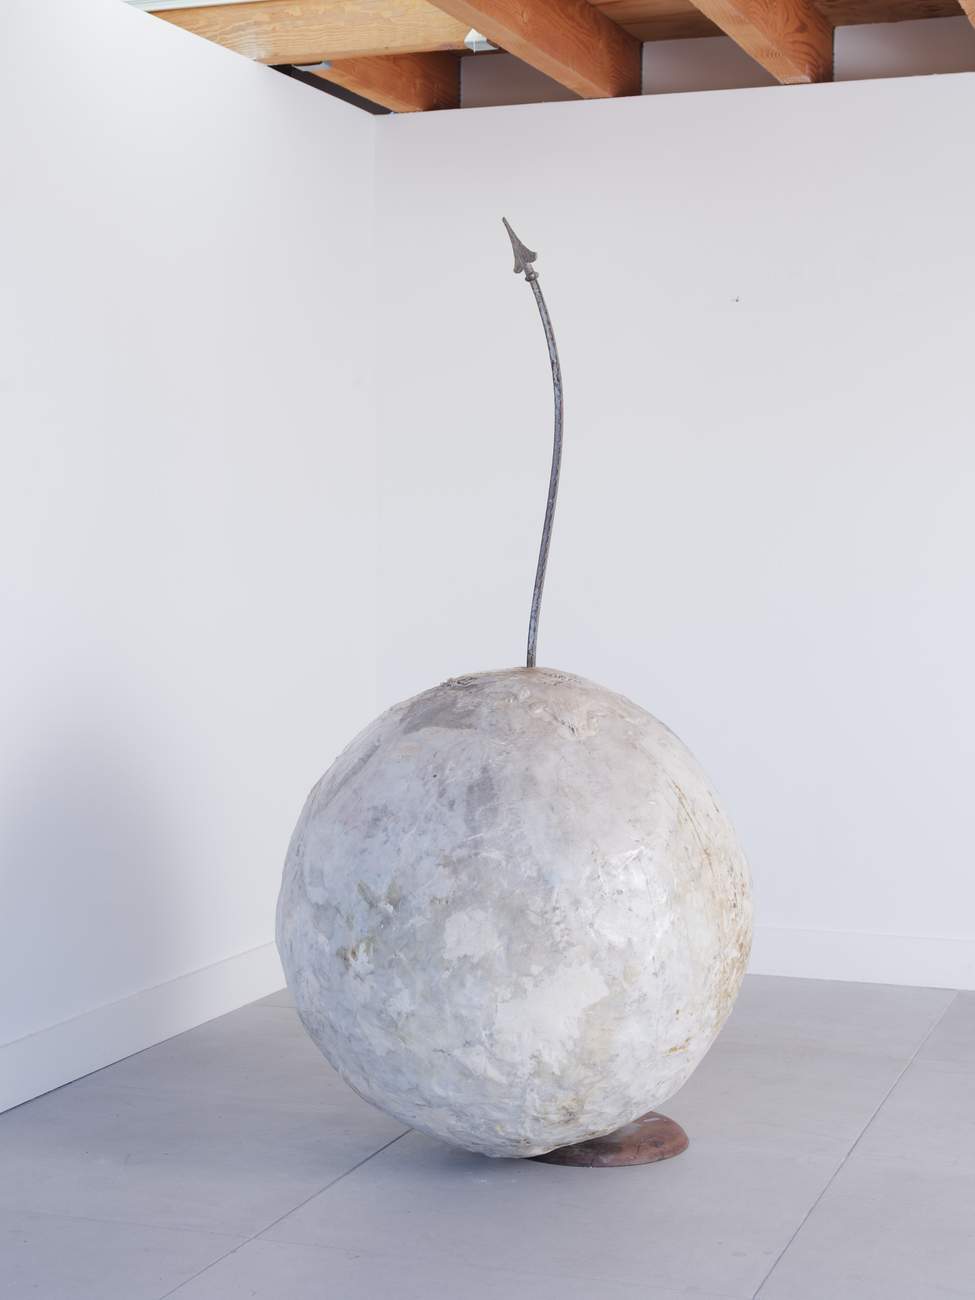 Preview image for Markus Bacher | Claire Chambless exhibition Feb 24 - Mar 31